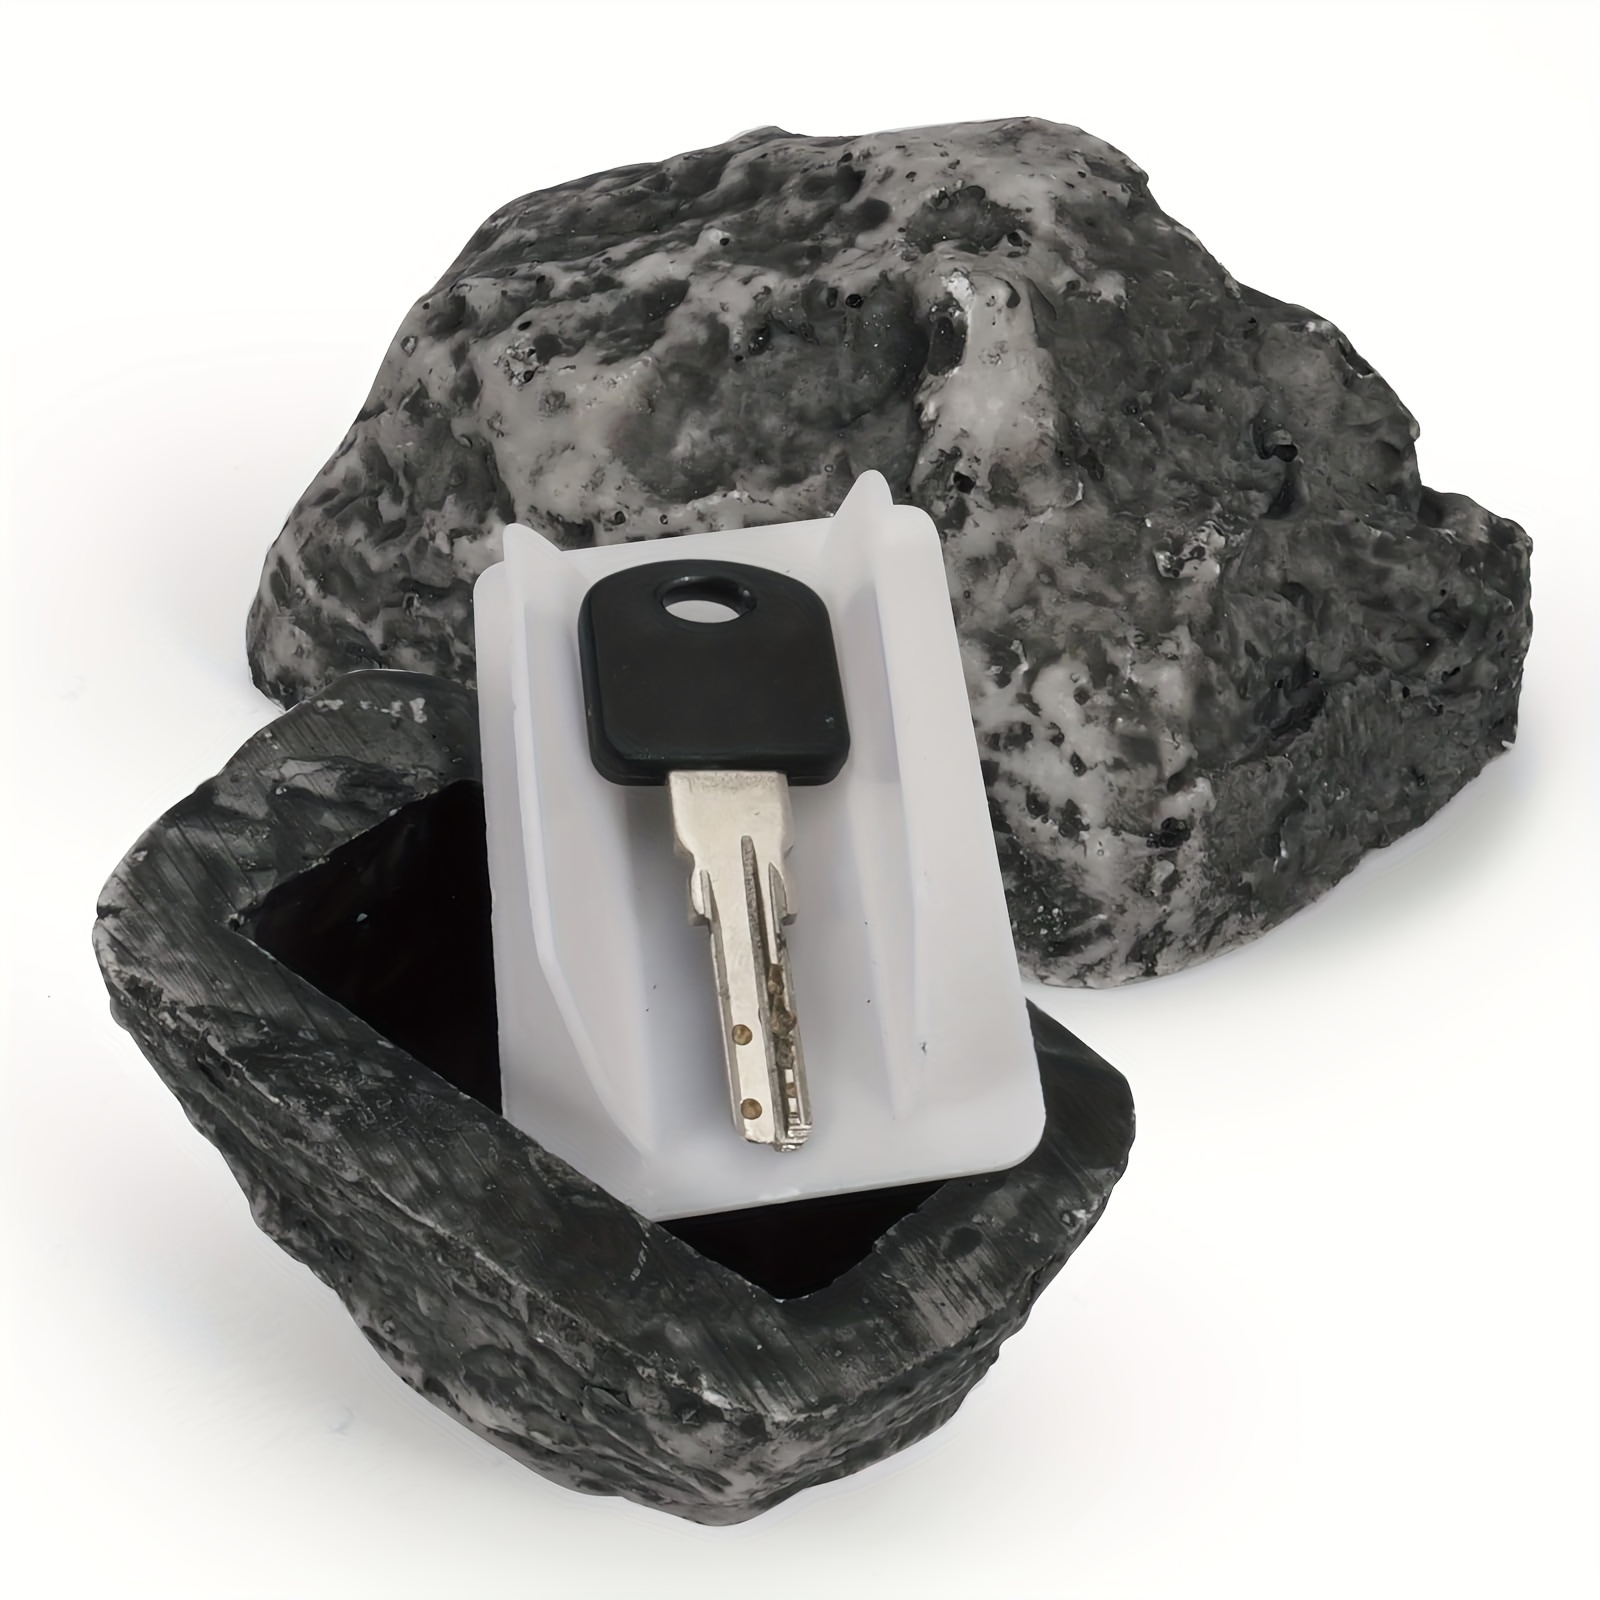 Artificial stone with secret compartment for extra key or geocaching 